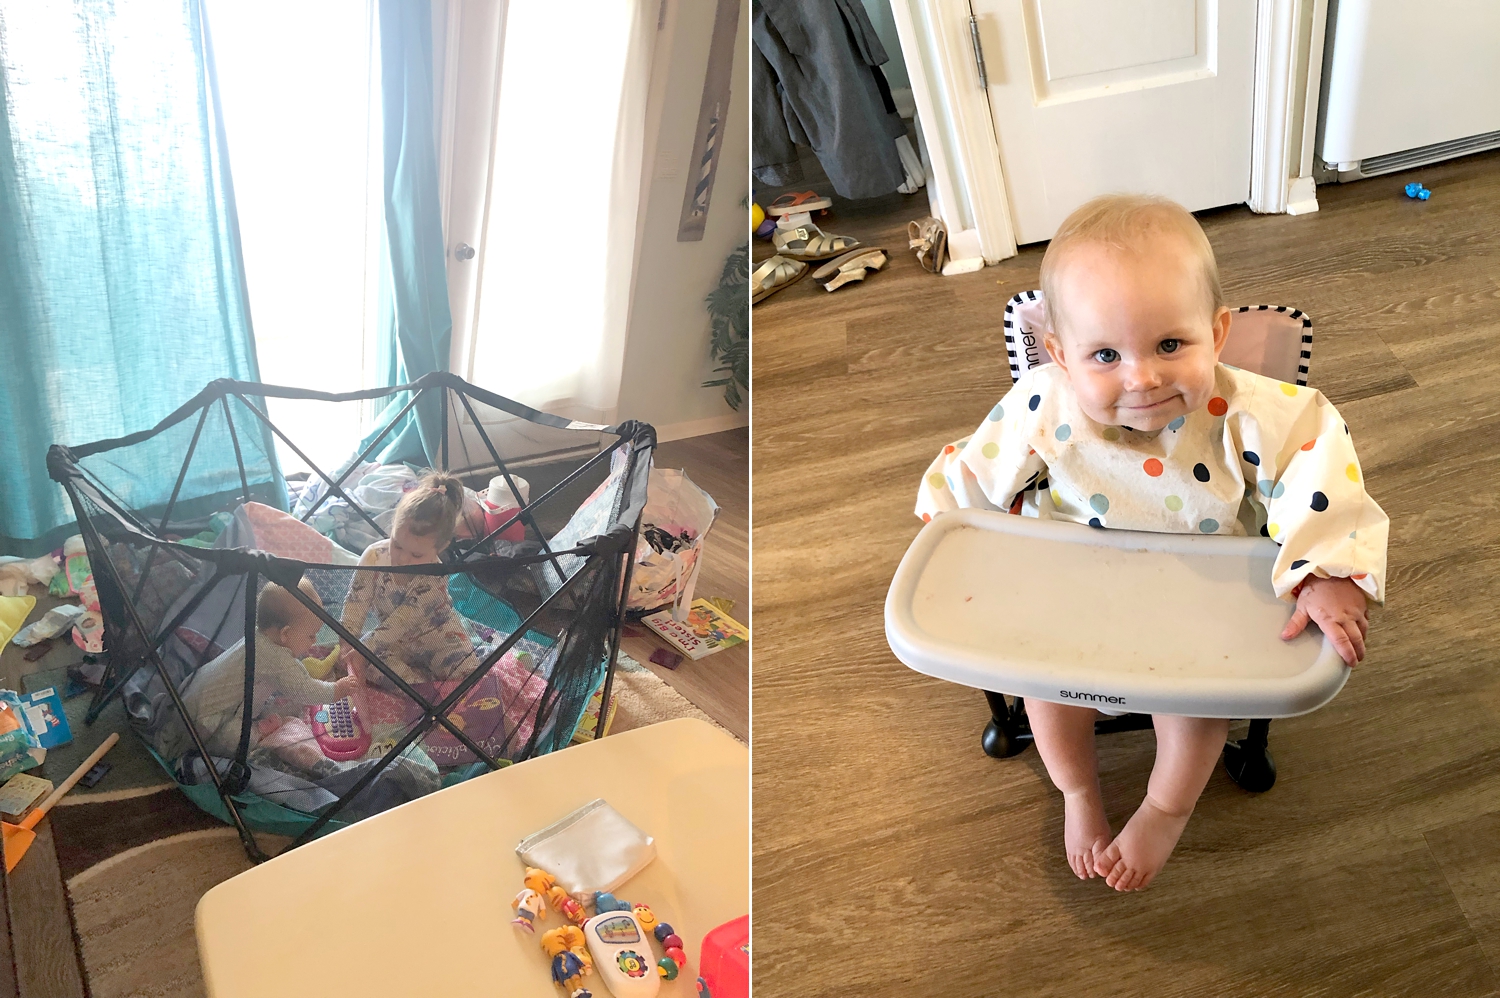  Both of these were great to have as well! We thought we would use the baby dome outside but we ended up using it inside when we needed to get ready. Hallie is crawling all over the place now so it was nice to have an enclosed area for her to play in